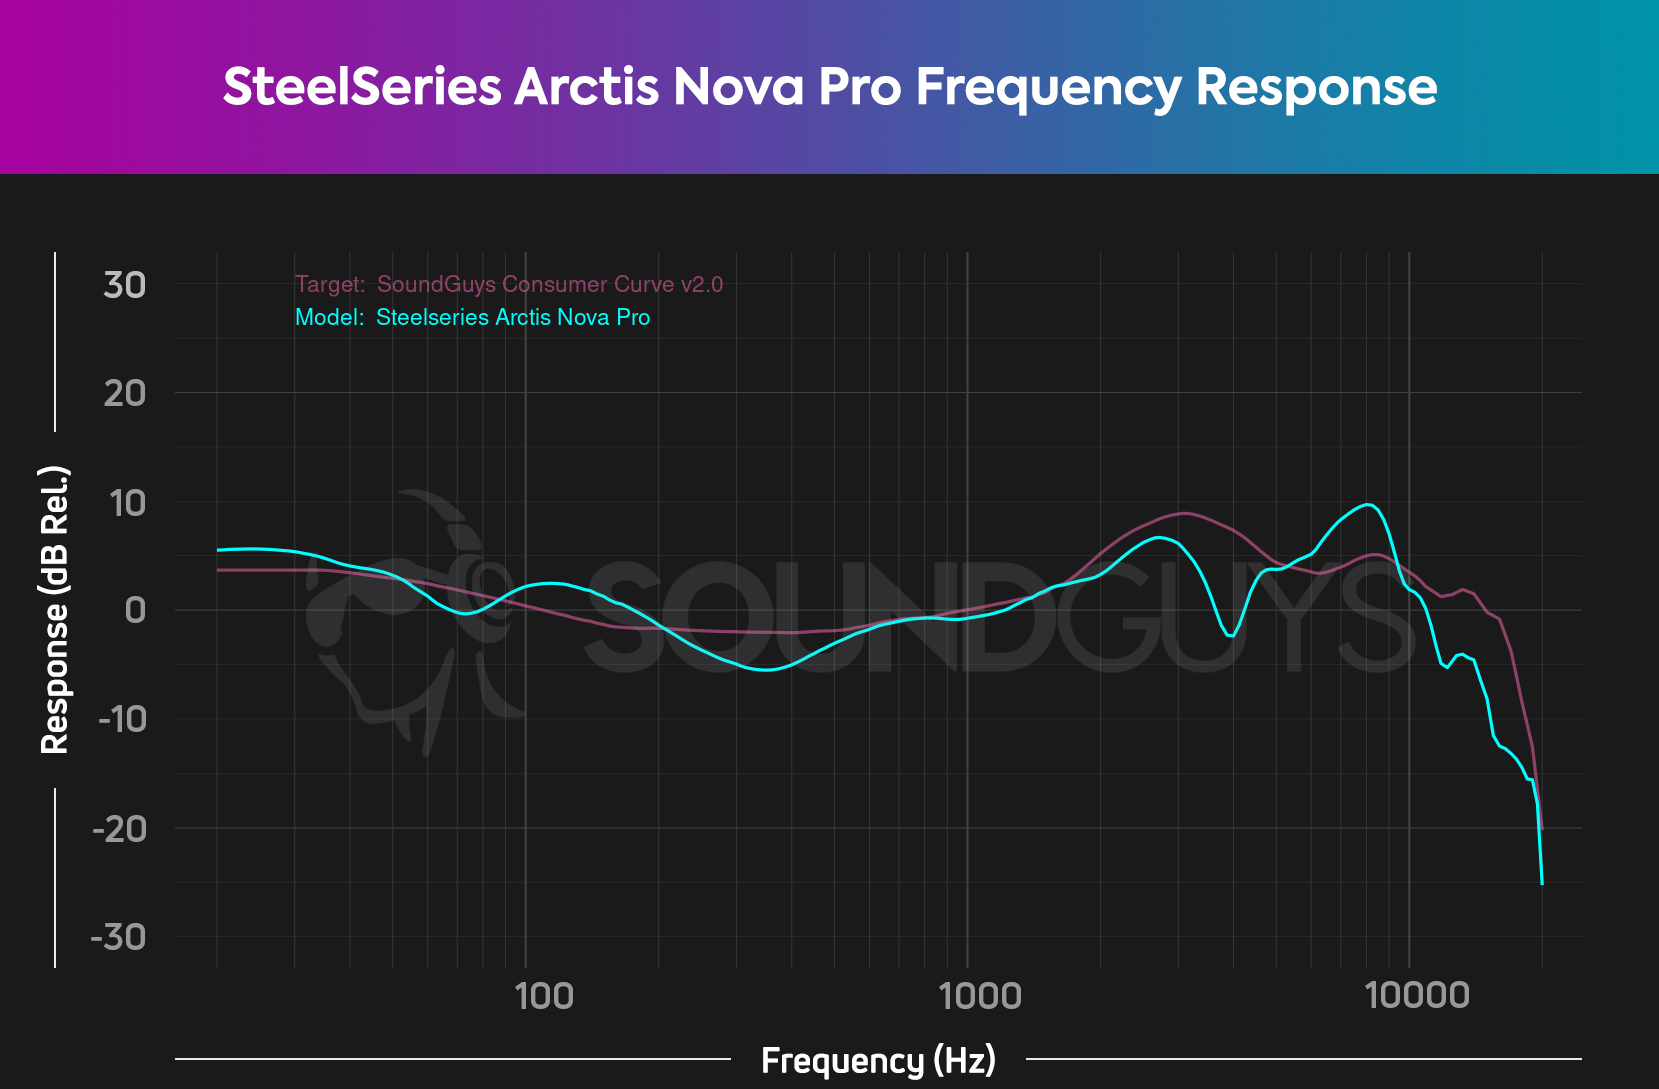 A frequency response chart for the SteelSeries Arctis Nova Pro, which shows accurate audio output across the frequency spectrum.